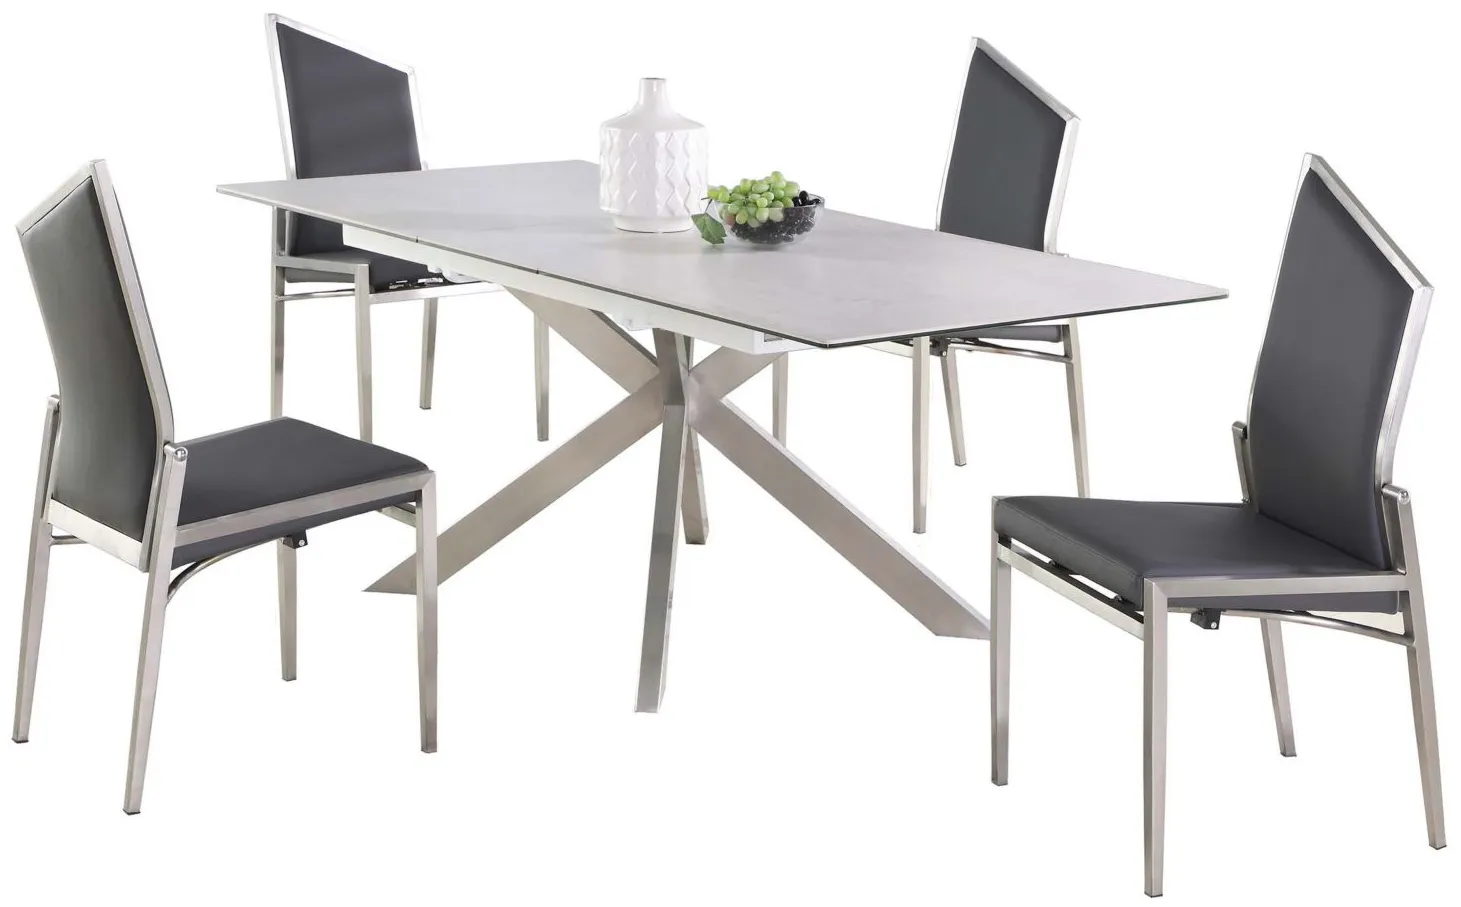 Nala 5-pc. Dining Set in Gray by Chintaly Imports